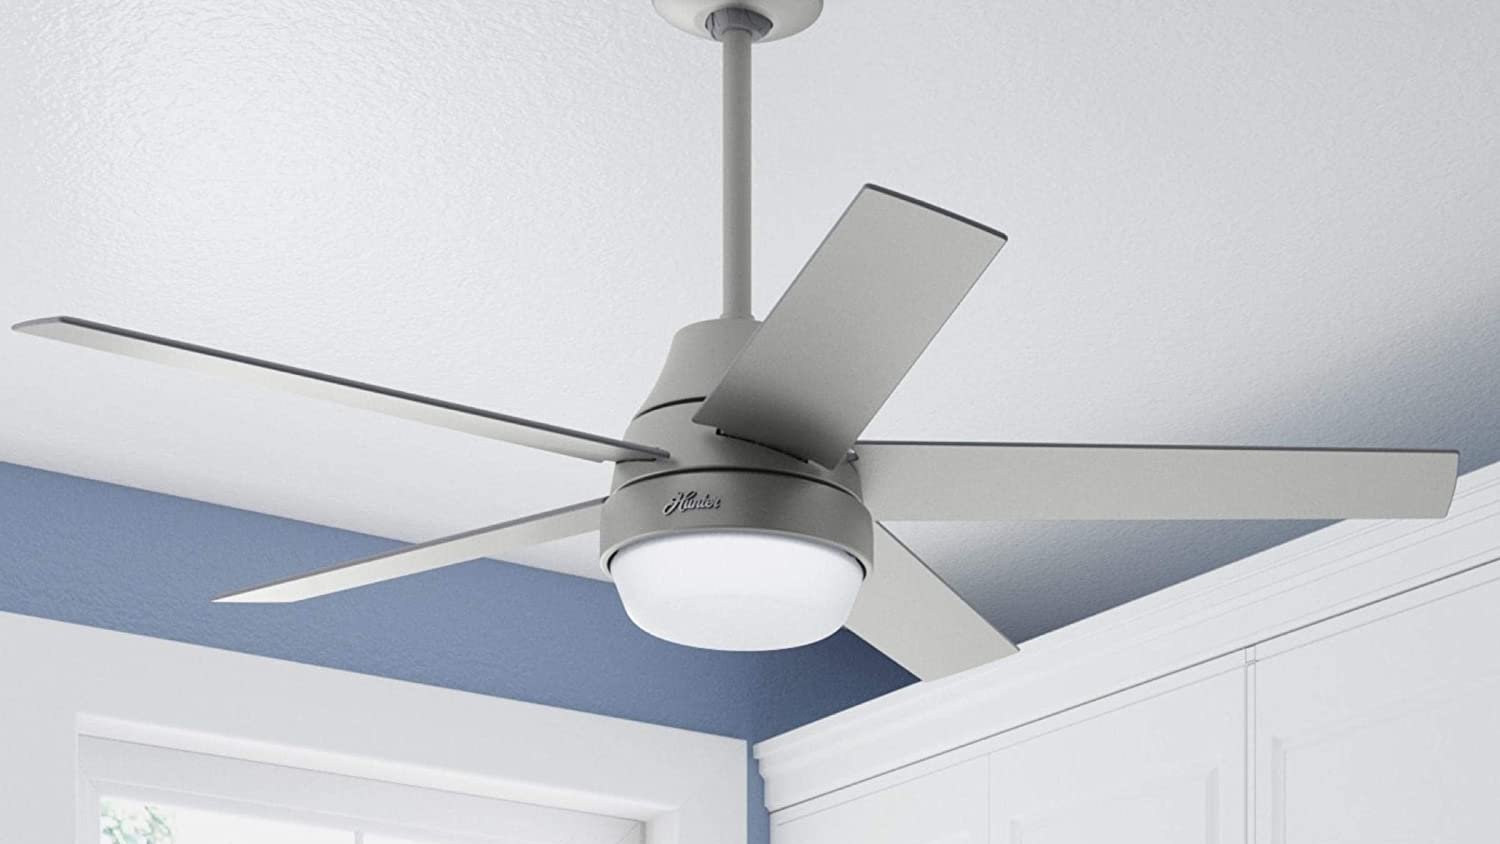 Best Hot Ceiling Fans 2022 Imore, Best Stainless Steel Ceiling Fans